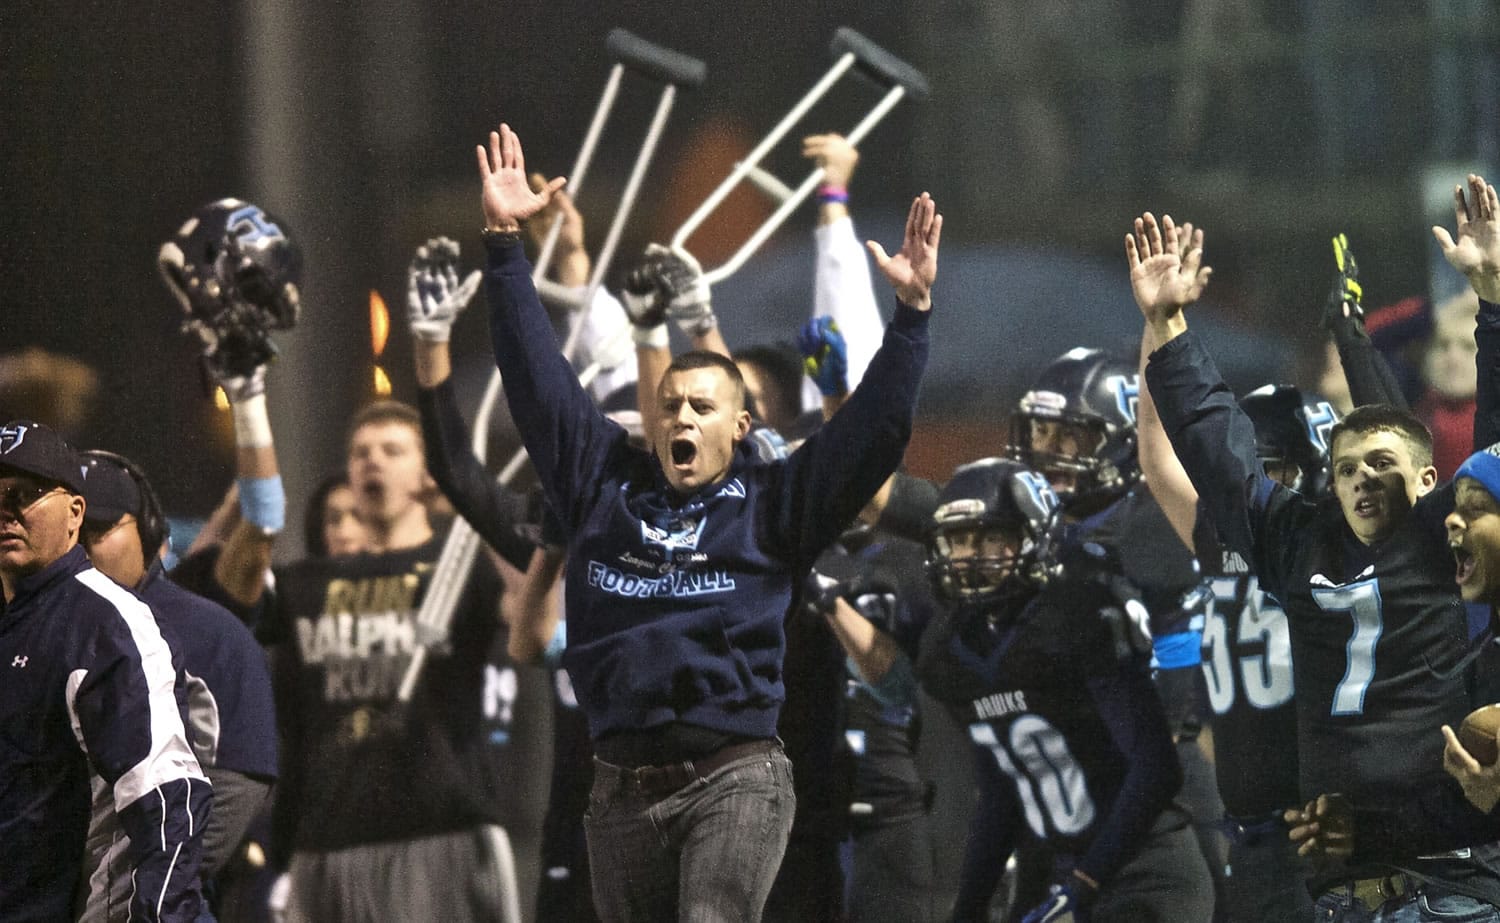 Hockinson's sideline reacts after Quentin Boedenhamer's 23-yard field goal with less than two minutes remaining gave the Hawks a 24-21 lead over Black Hills that stood as the final.